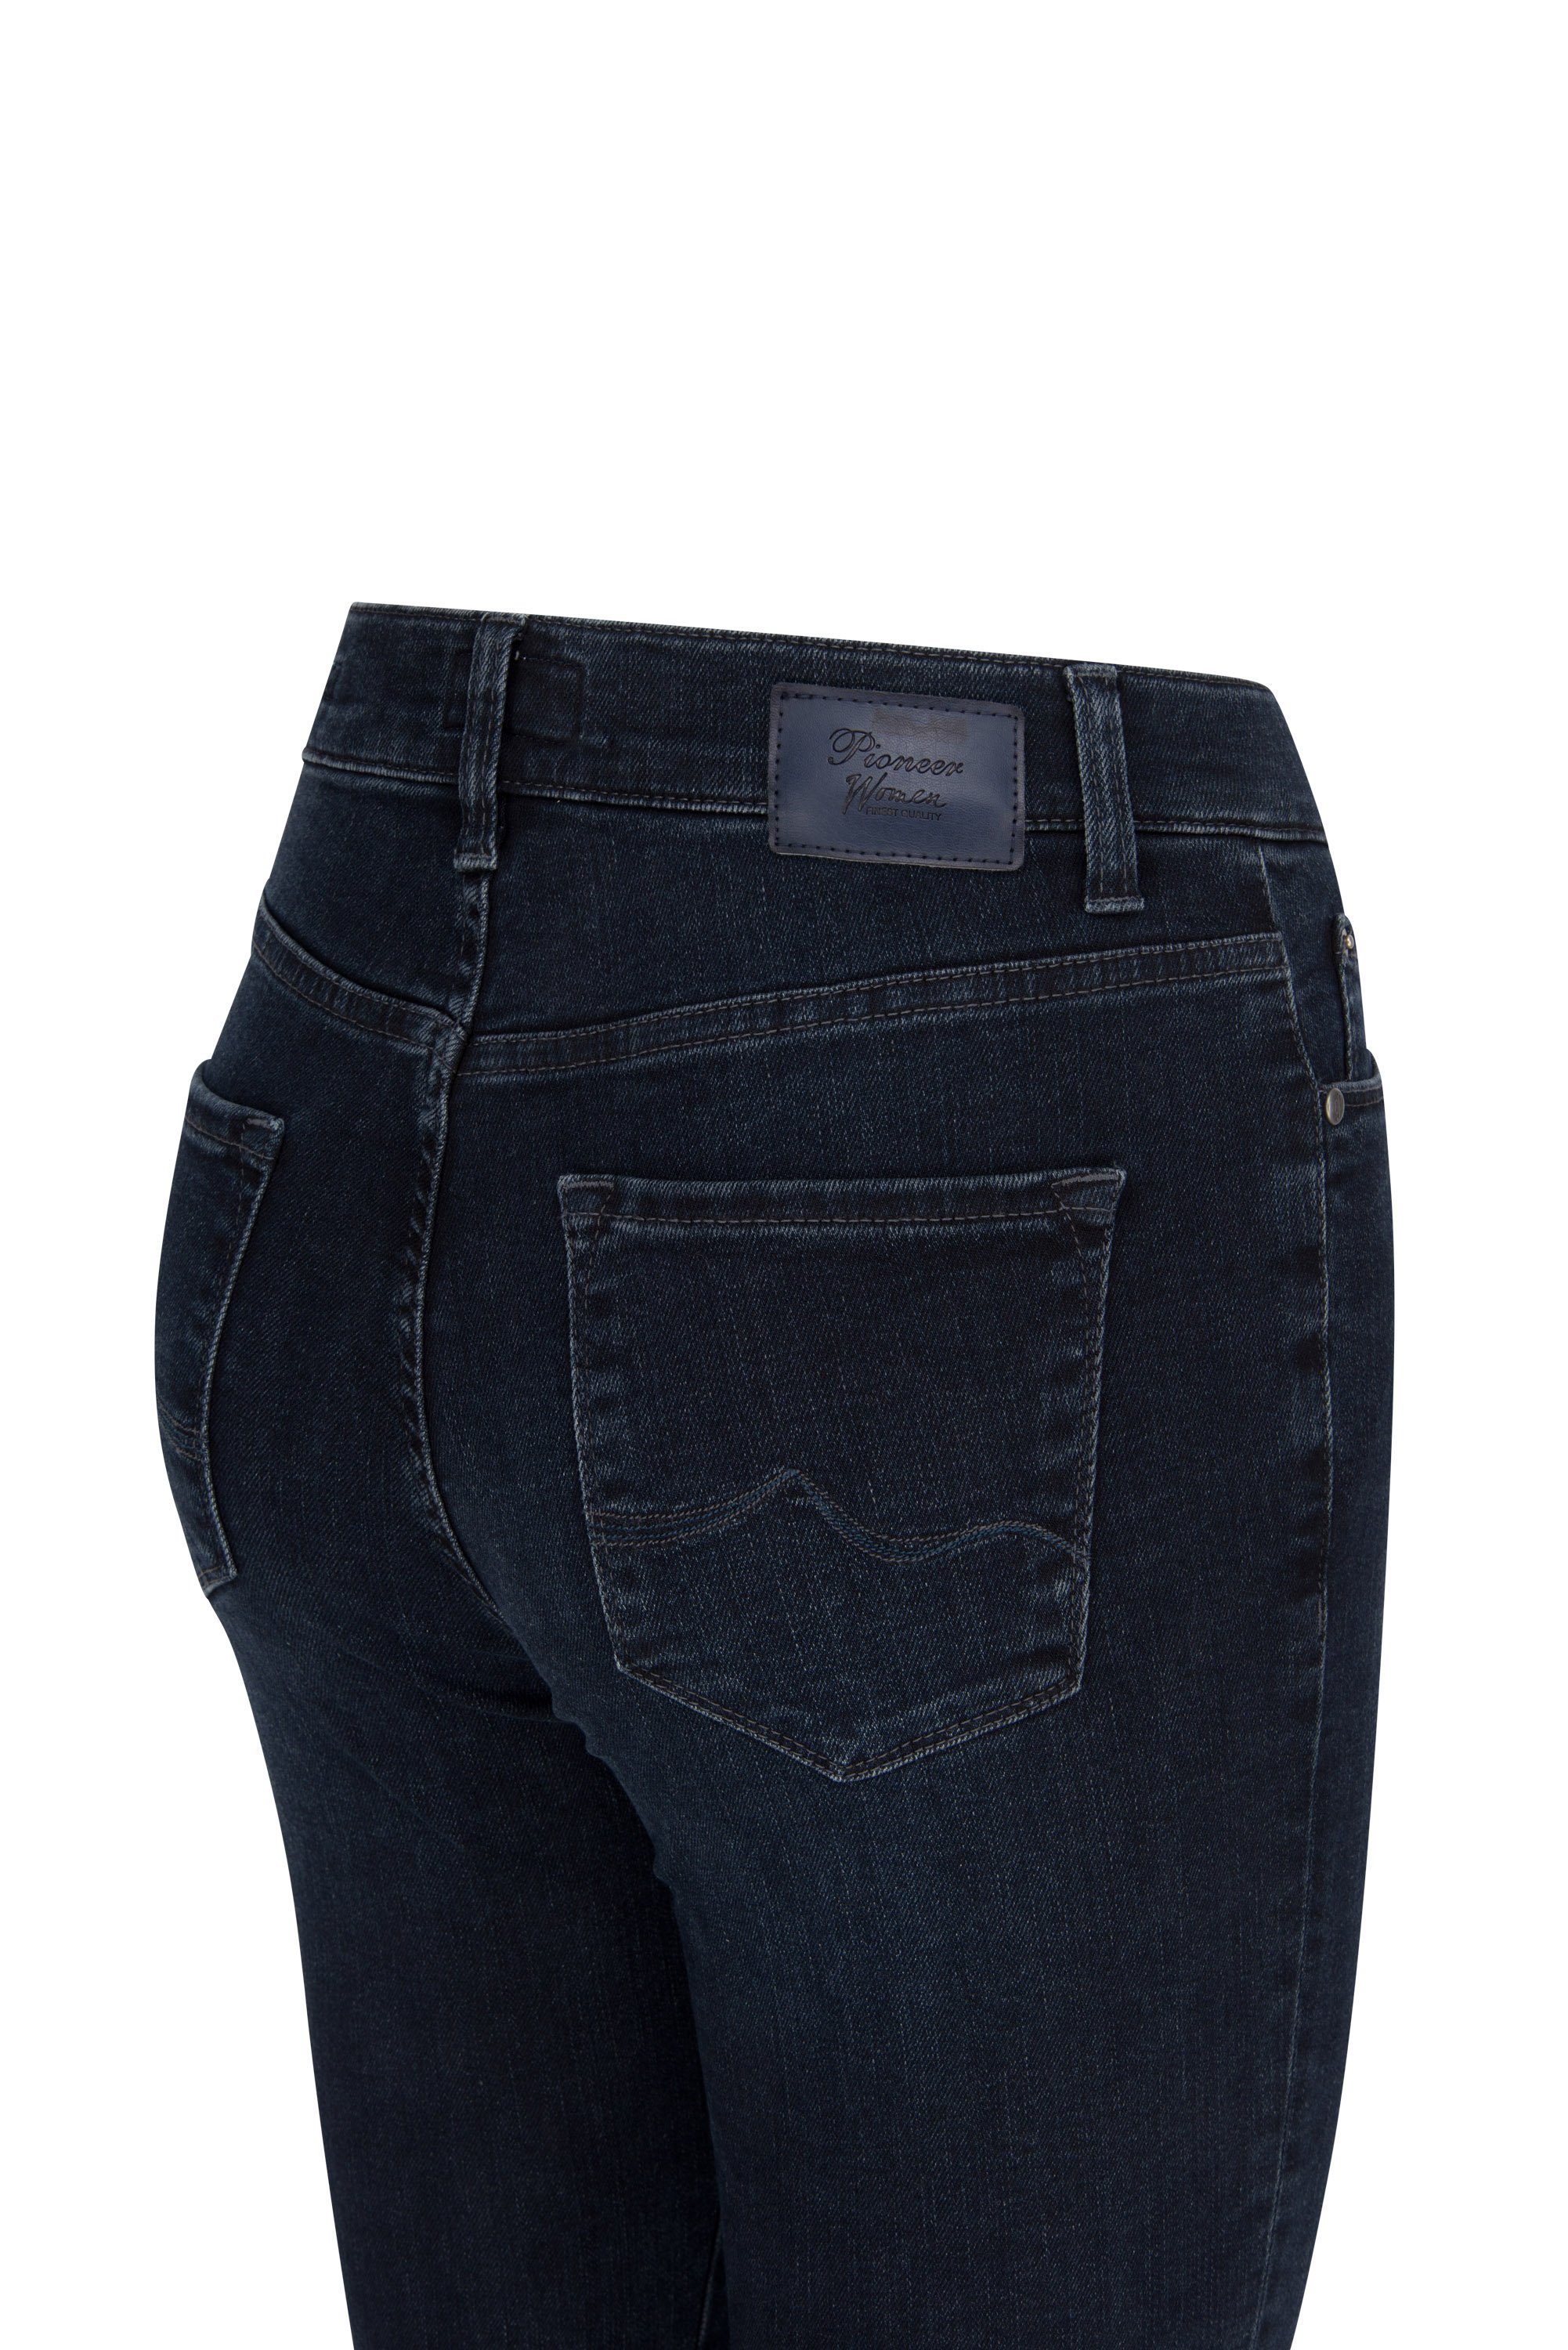 Pioneer Authentic Jeans dark blue PIONEER - out washed POWERSTRETCH 3011 5011.62 Stretch-Jeans KATY